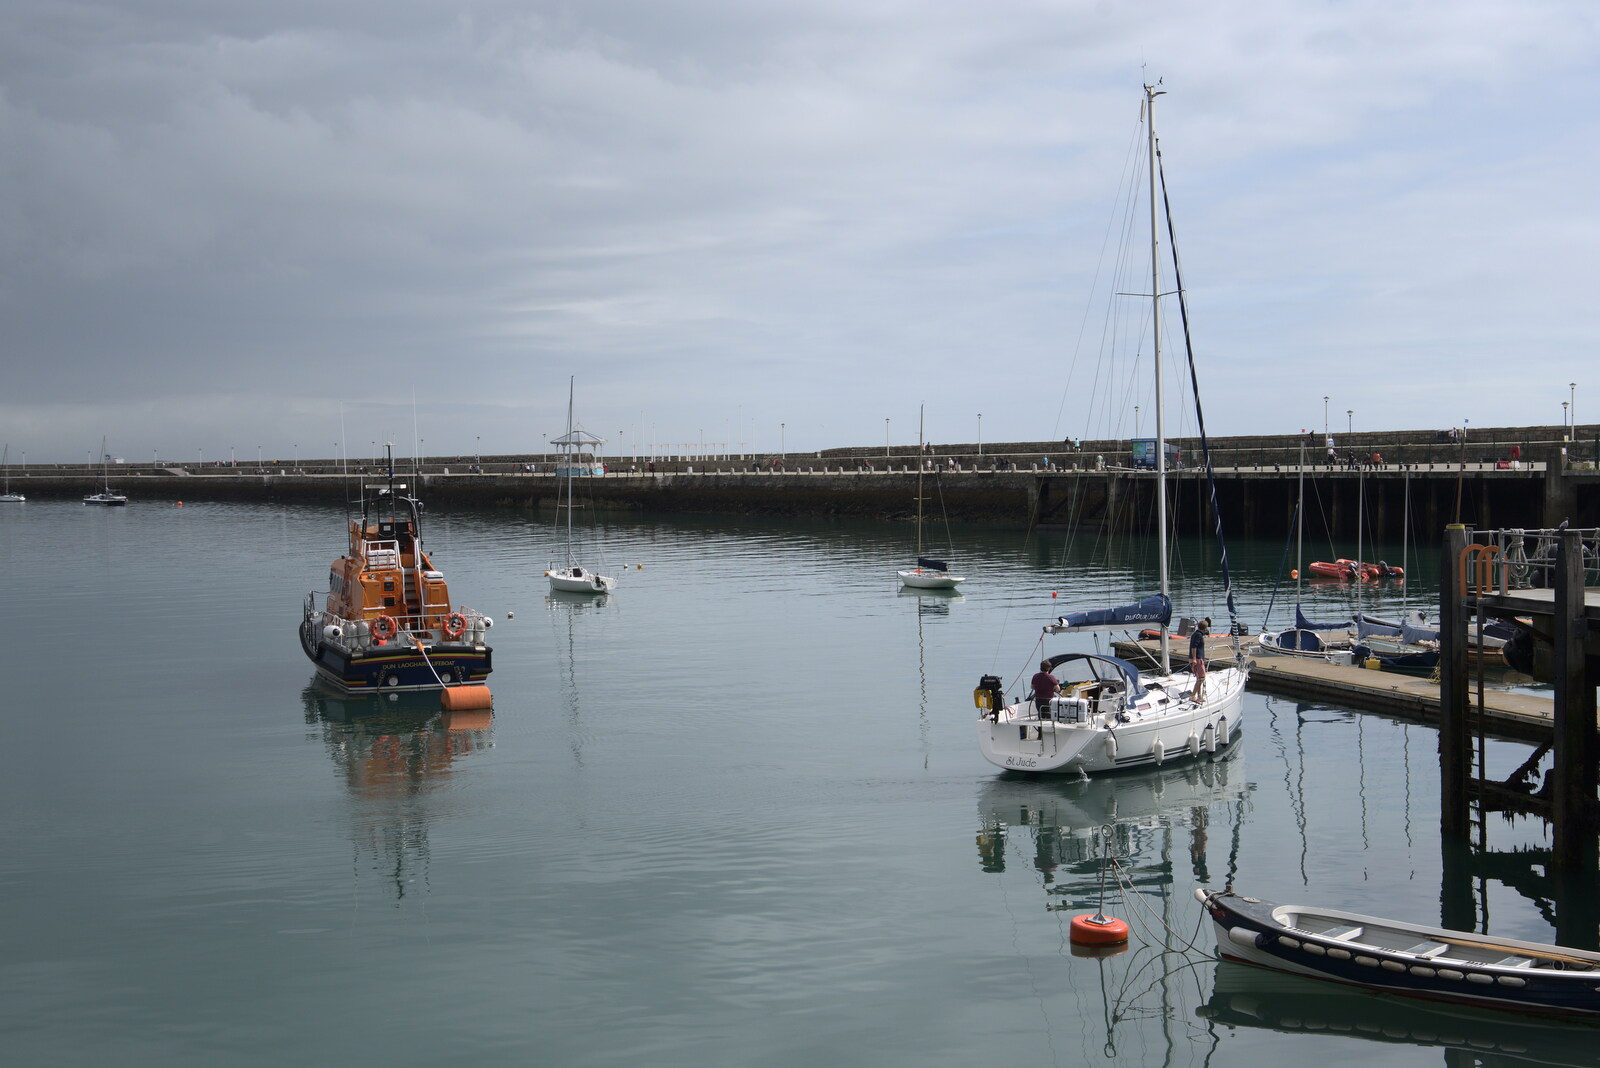 The lifeboat floats around on the still water from Manorhamilton and the Street Art of Dún Laoghaire, Ireland - 15th August 2021